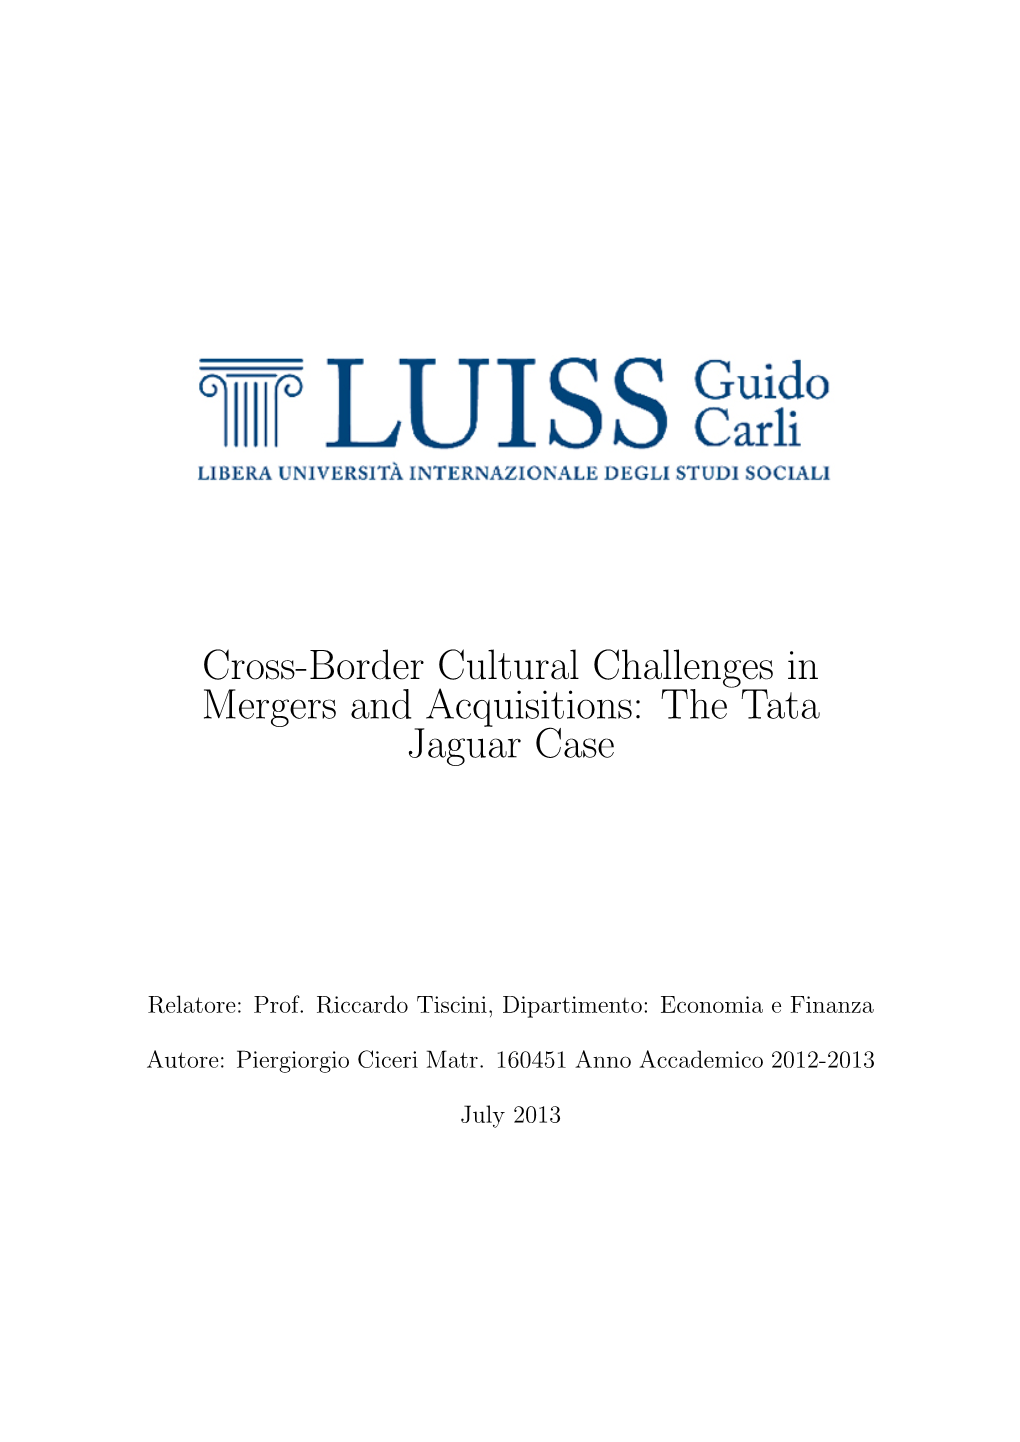 Cross-Border Cultural Challenges in Mergers and Acquisitions: the Tata Jaguar Case